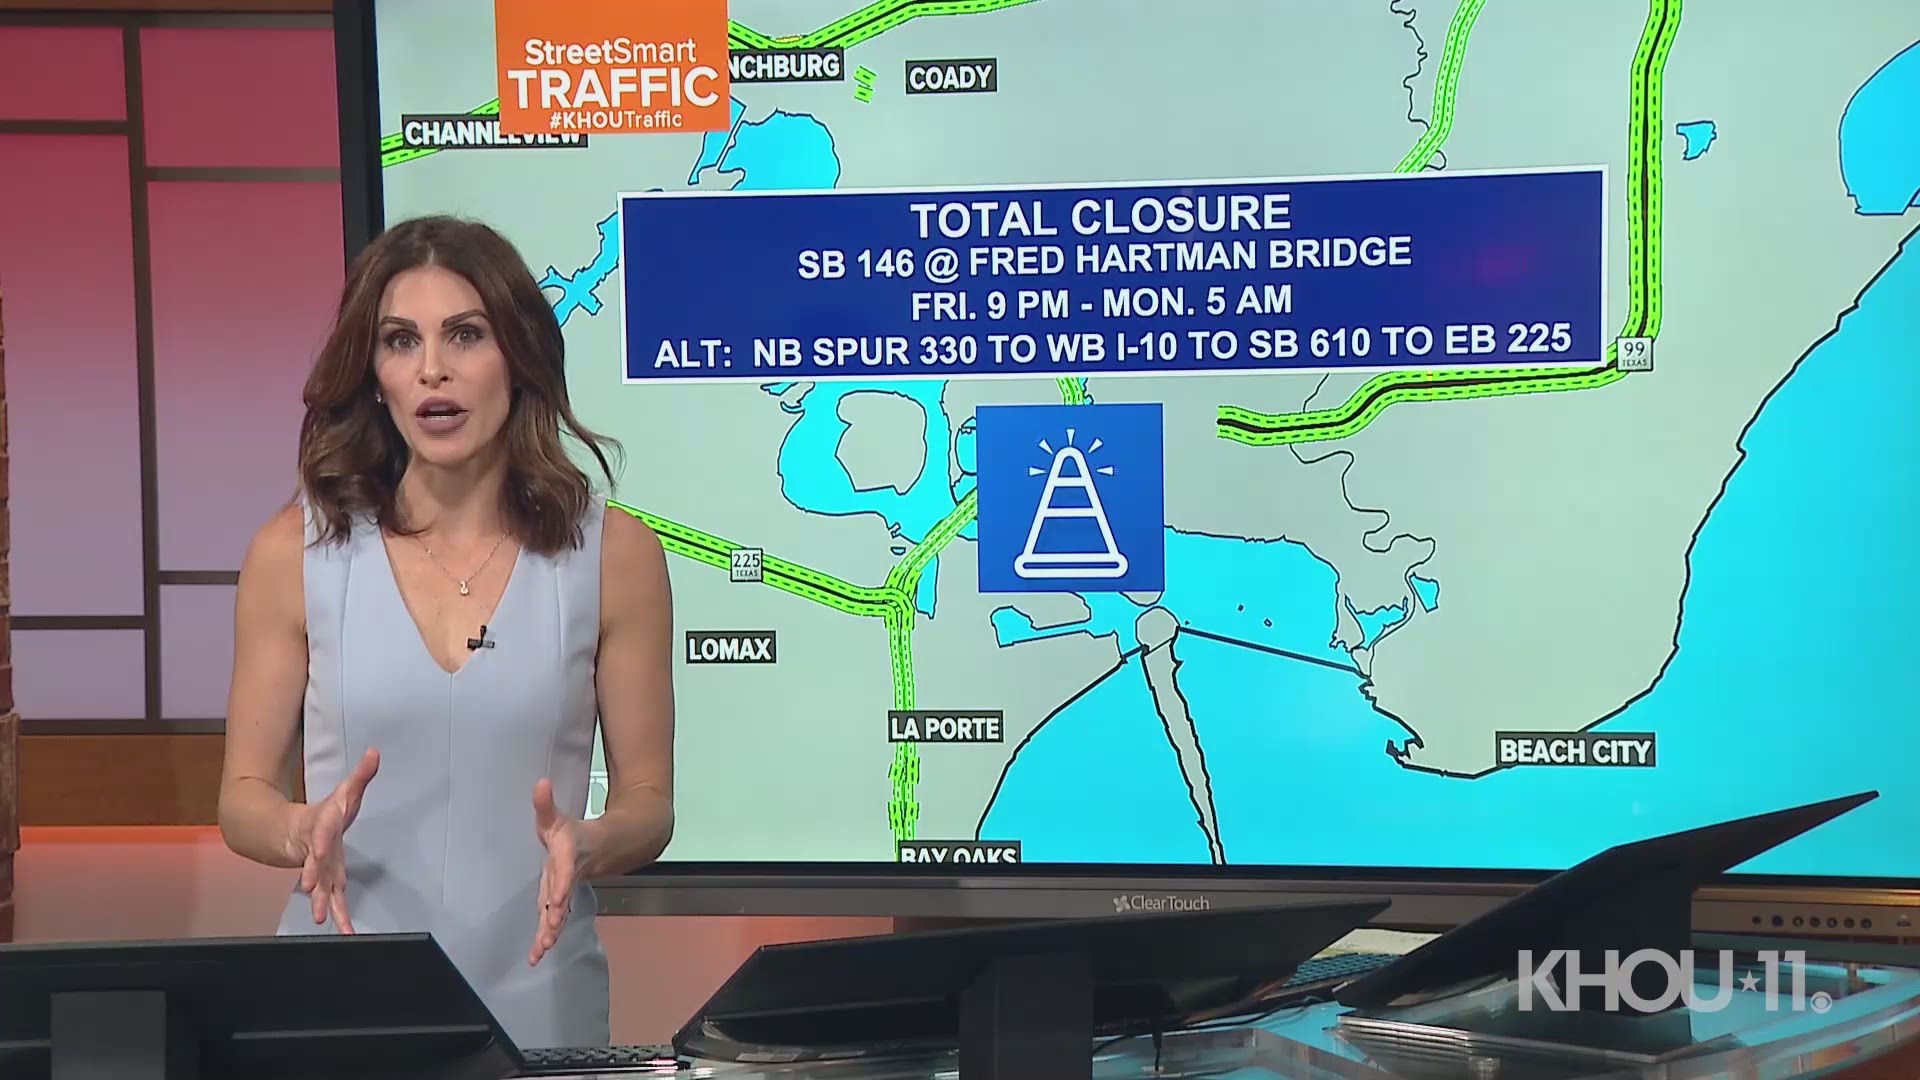 You've been warned! KHOU 11's Stephanie Simmons says more closures go into effect tonight, July 23